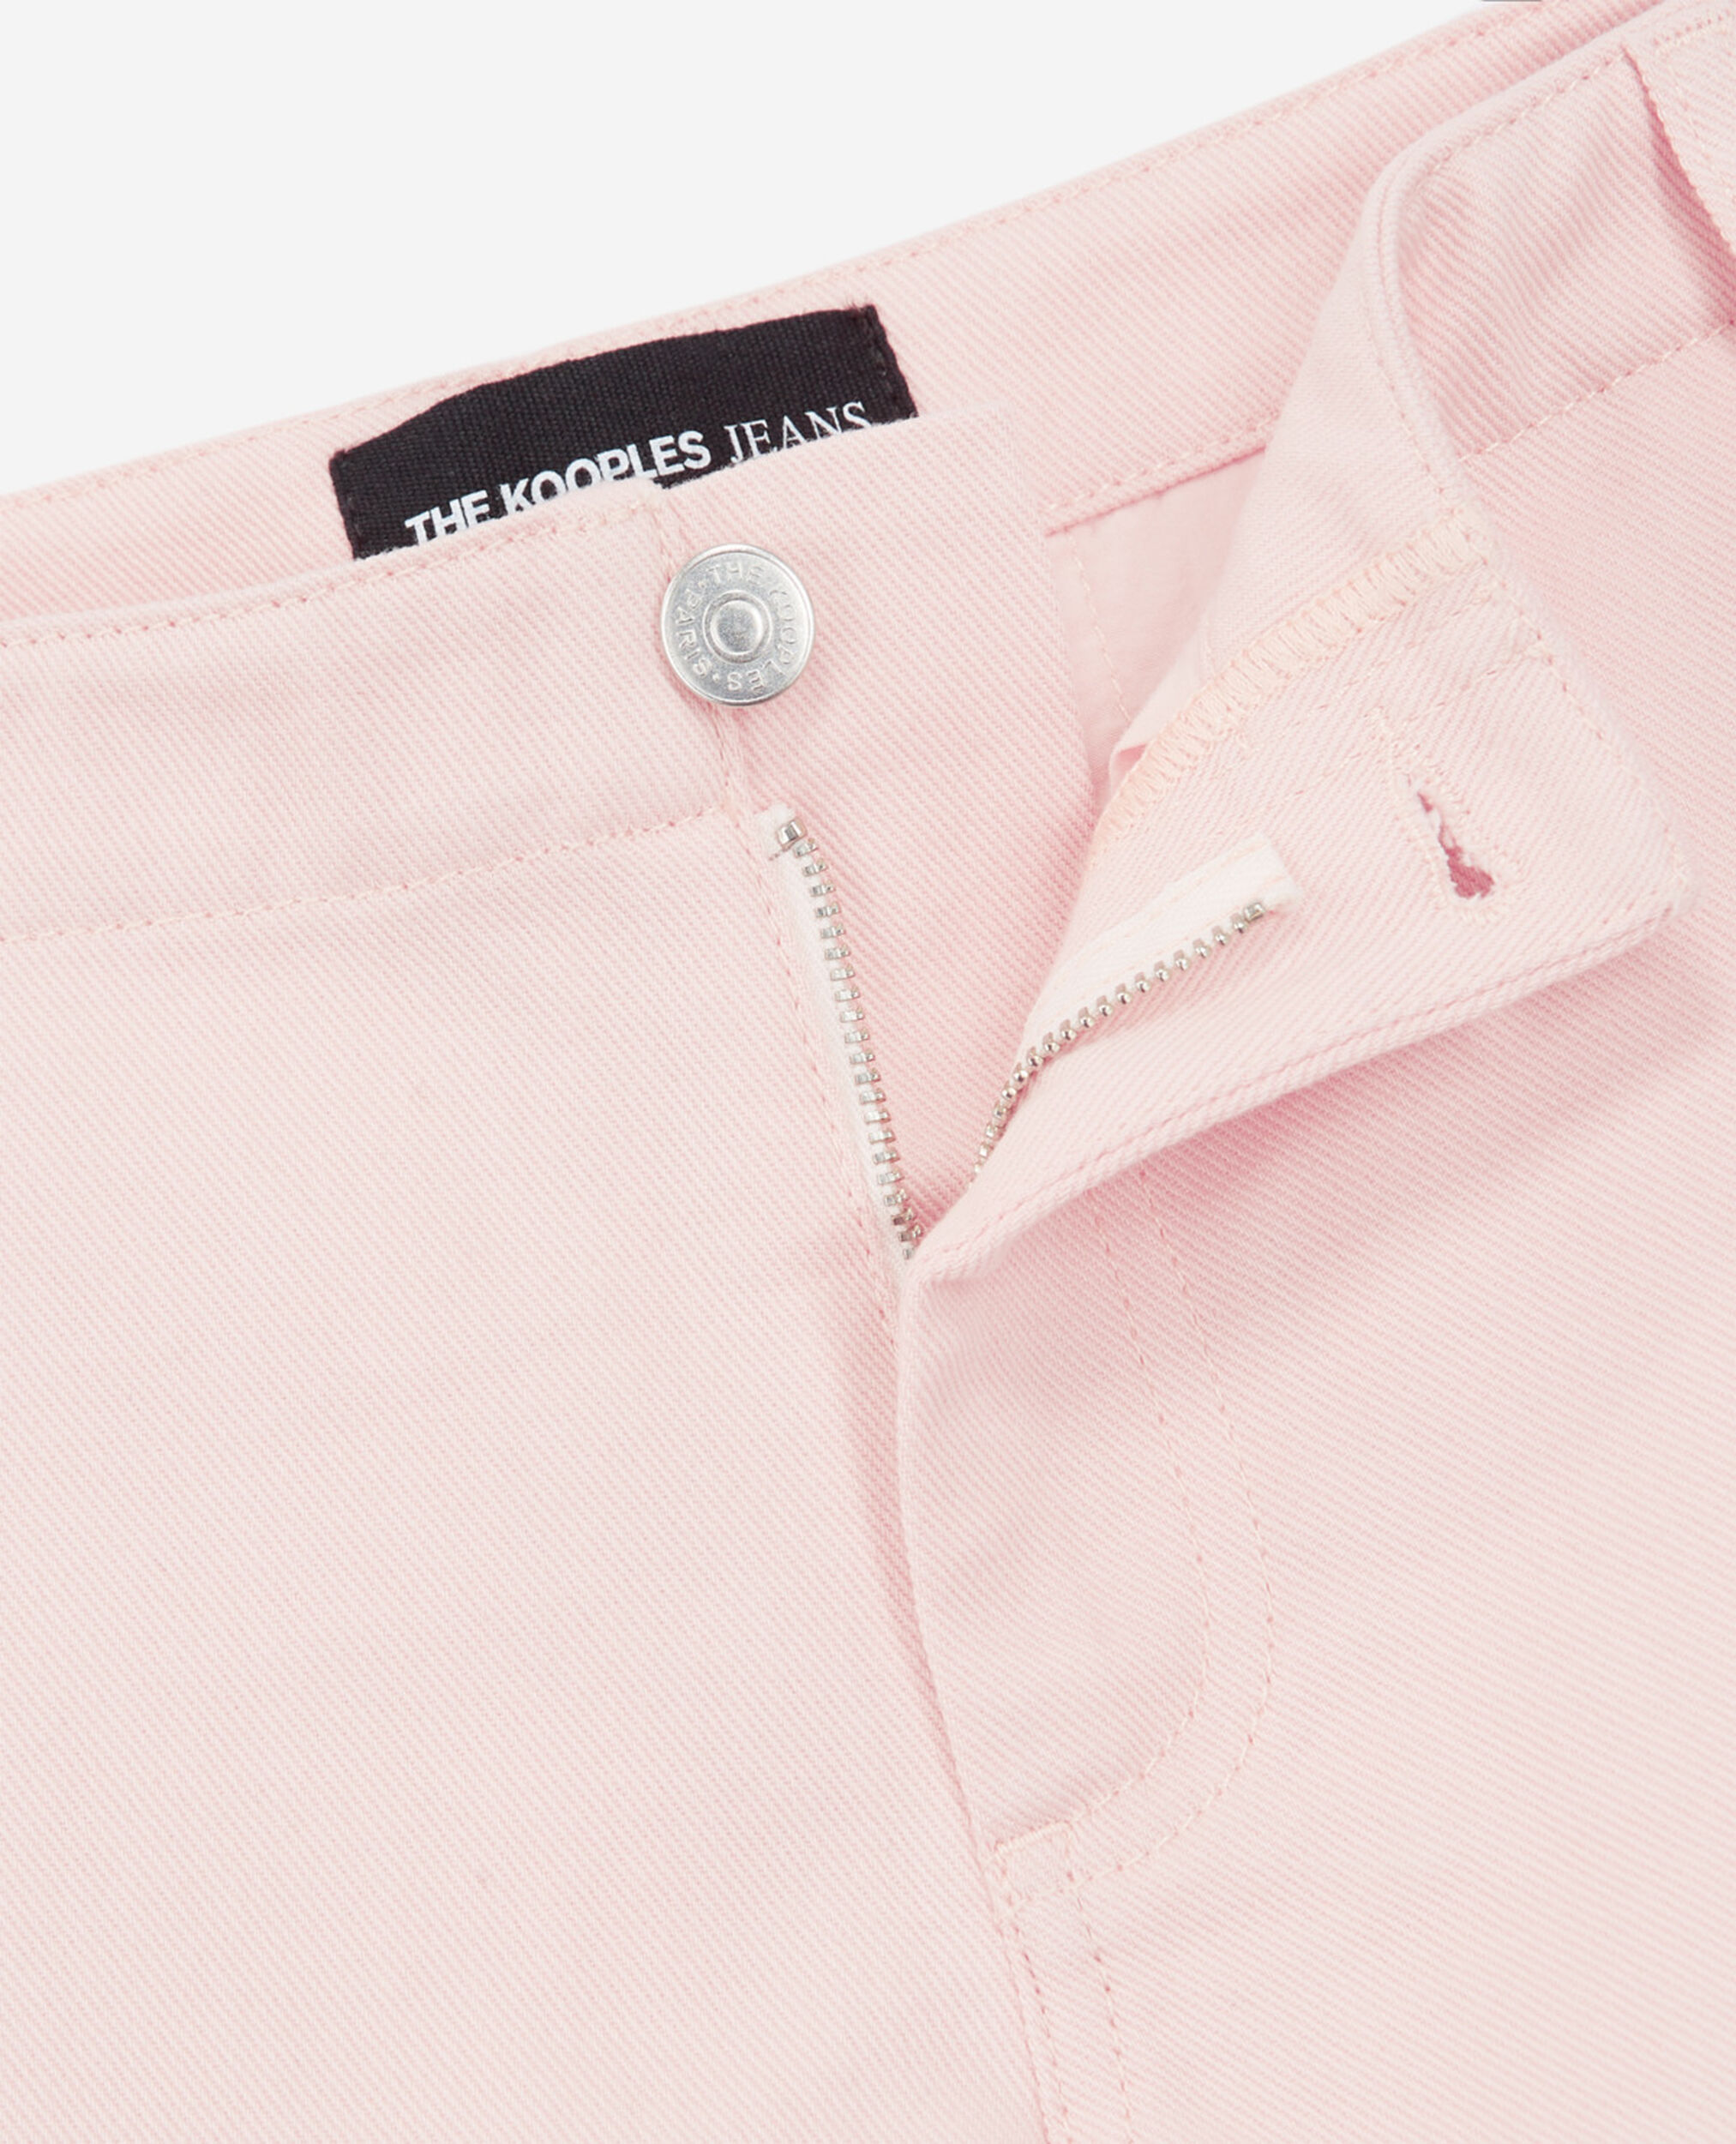 Pink organic cotton shorts with cargo pockets, LIGHT PINK, hi-res image number null